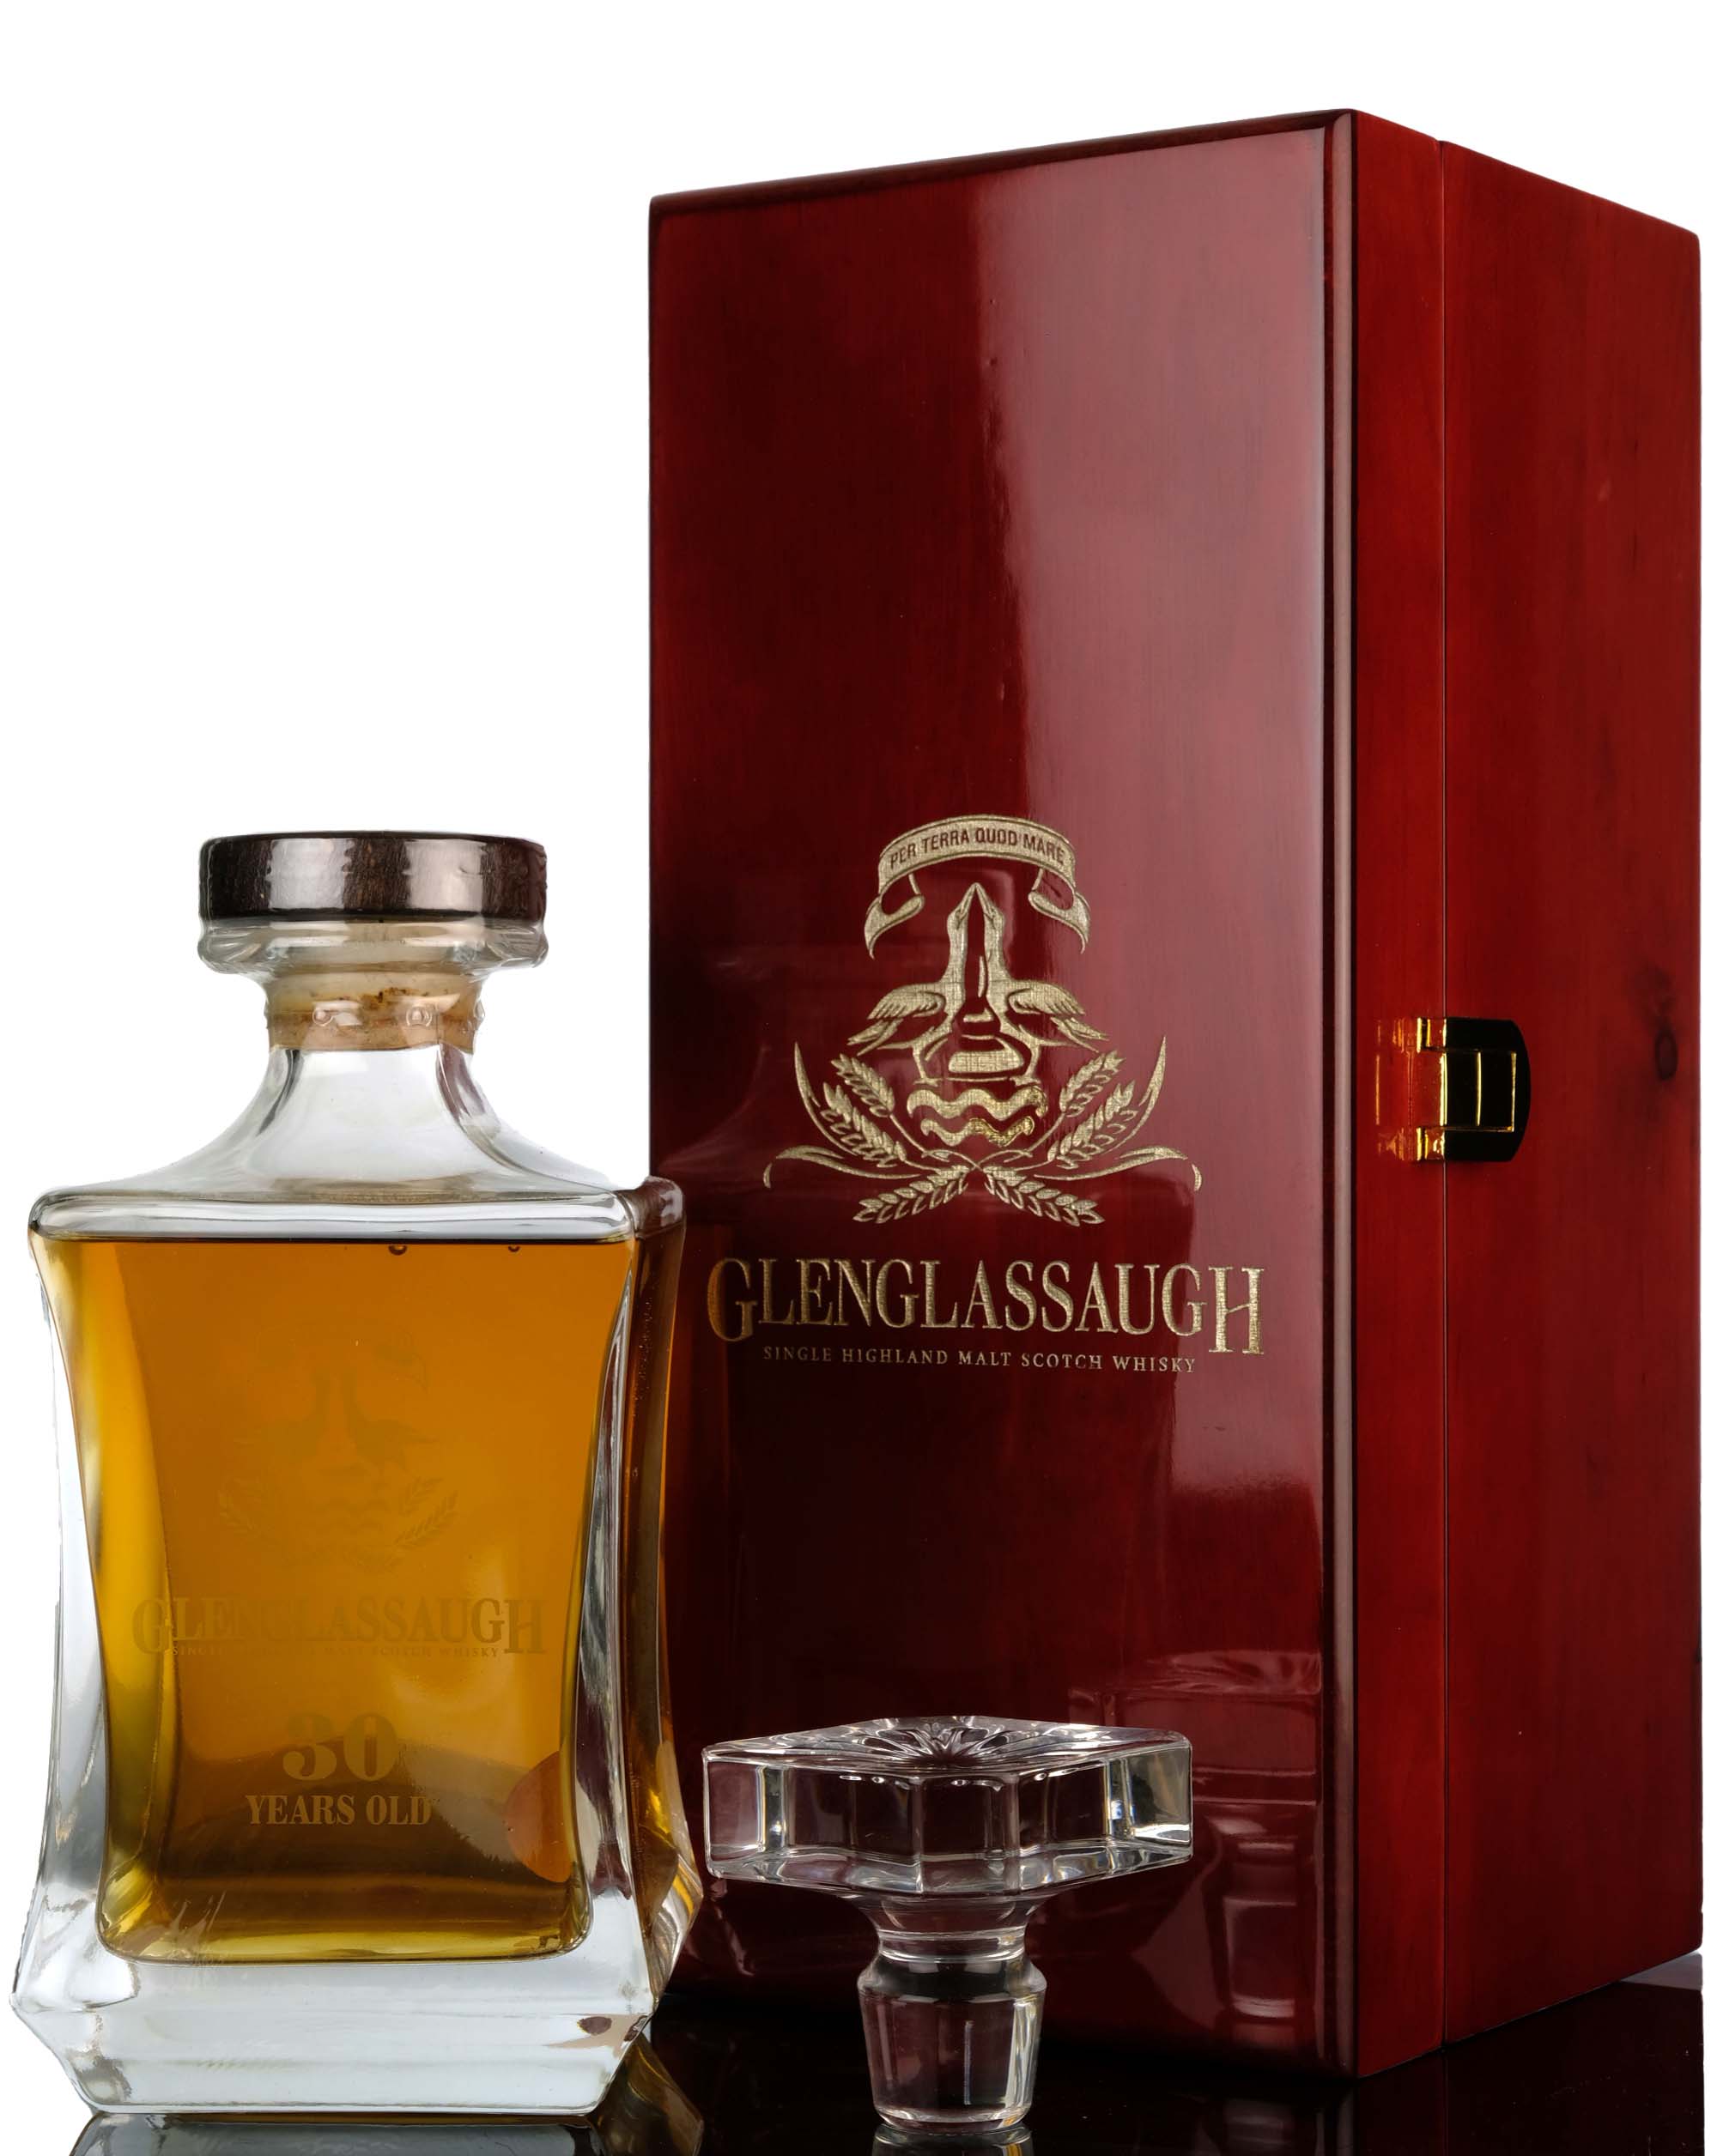 Glenglassaugh 30 Year Old - 2008 Release